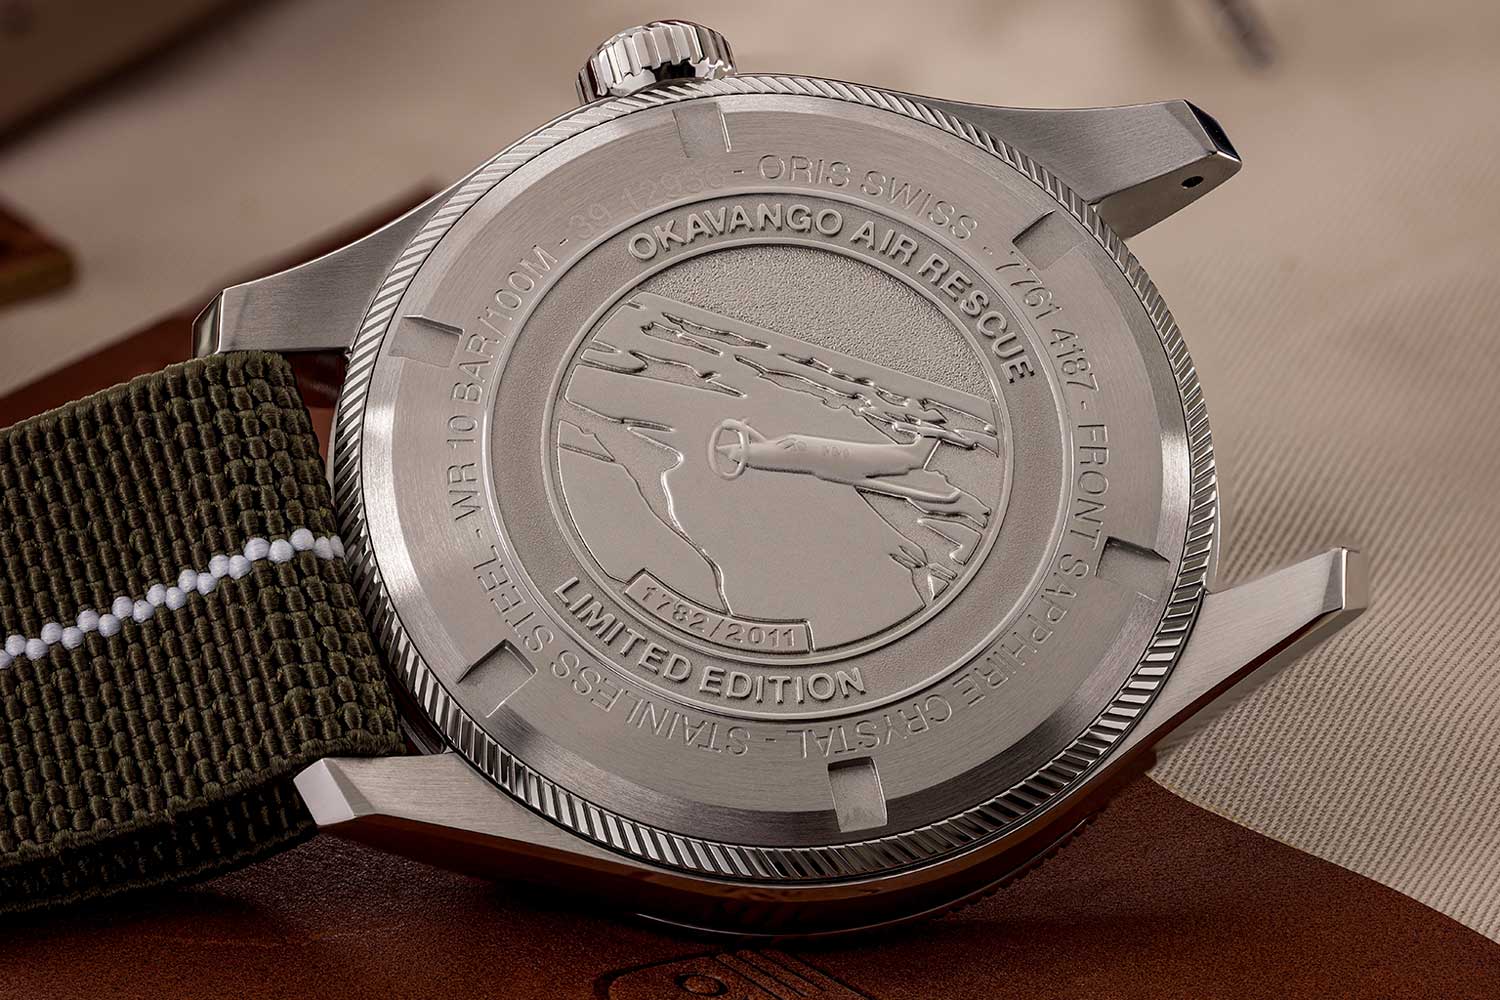 The caseback is engraved with an image of their PC-12 flying over the Delta and the edition number.